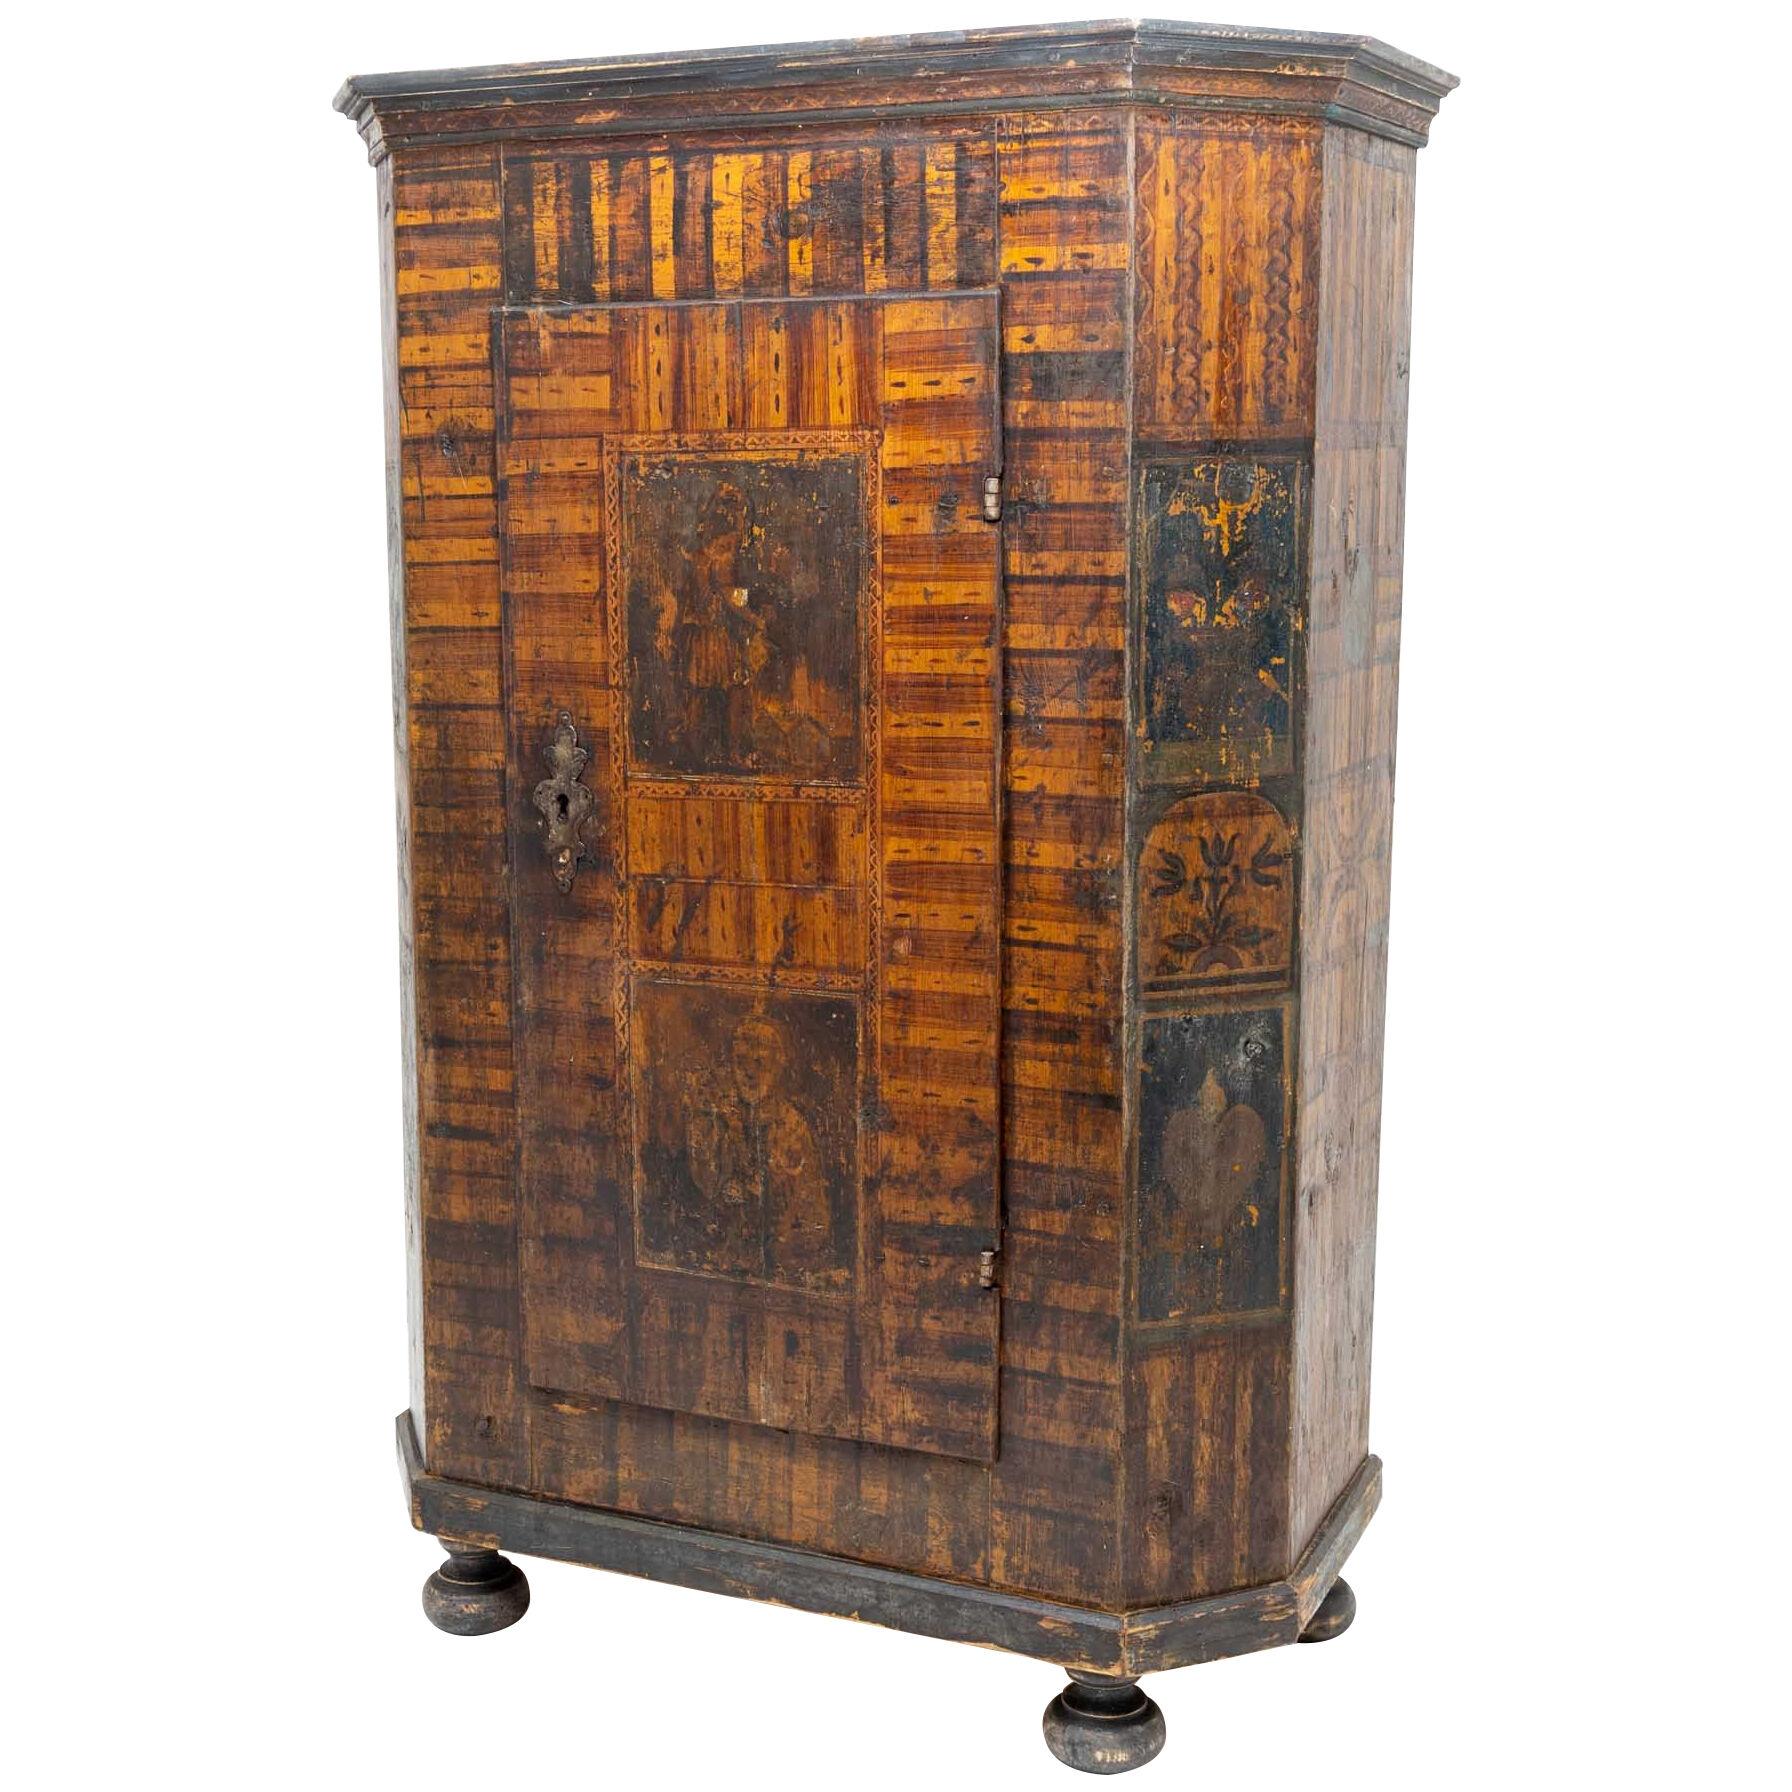 Peasant cabinet, Late 18th Century